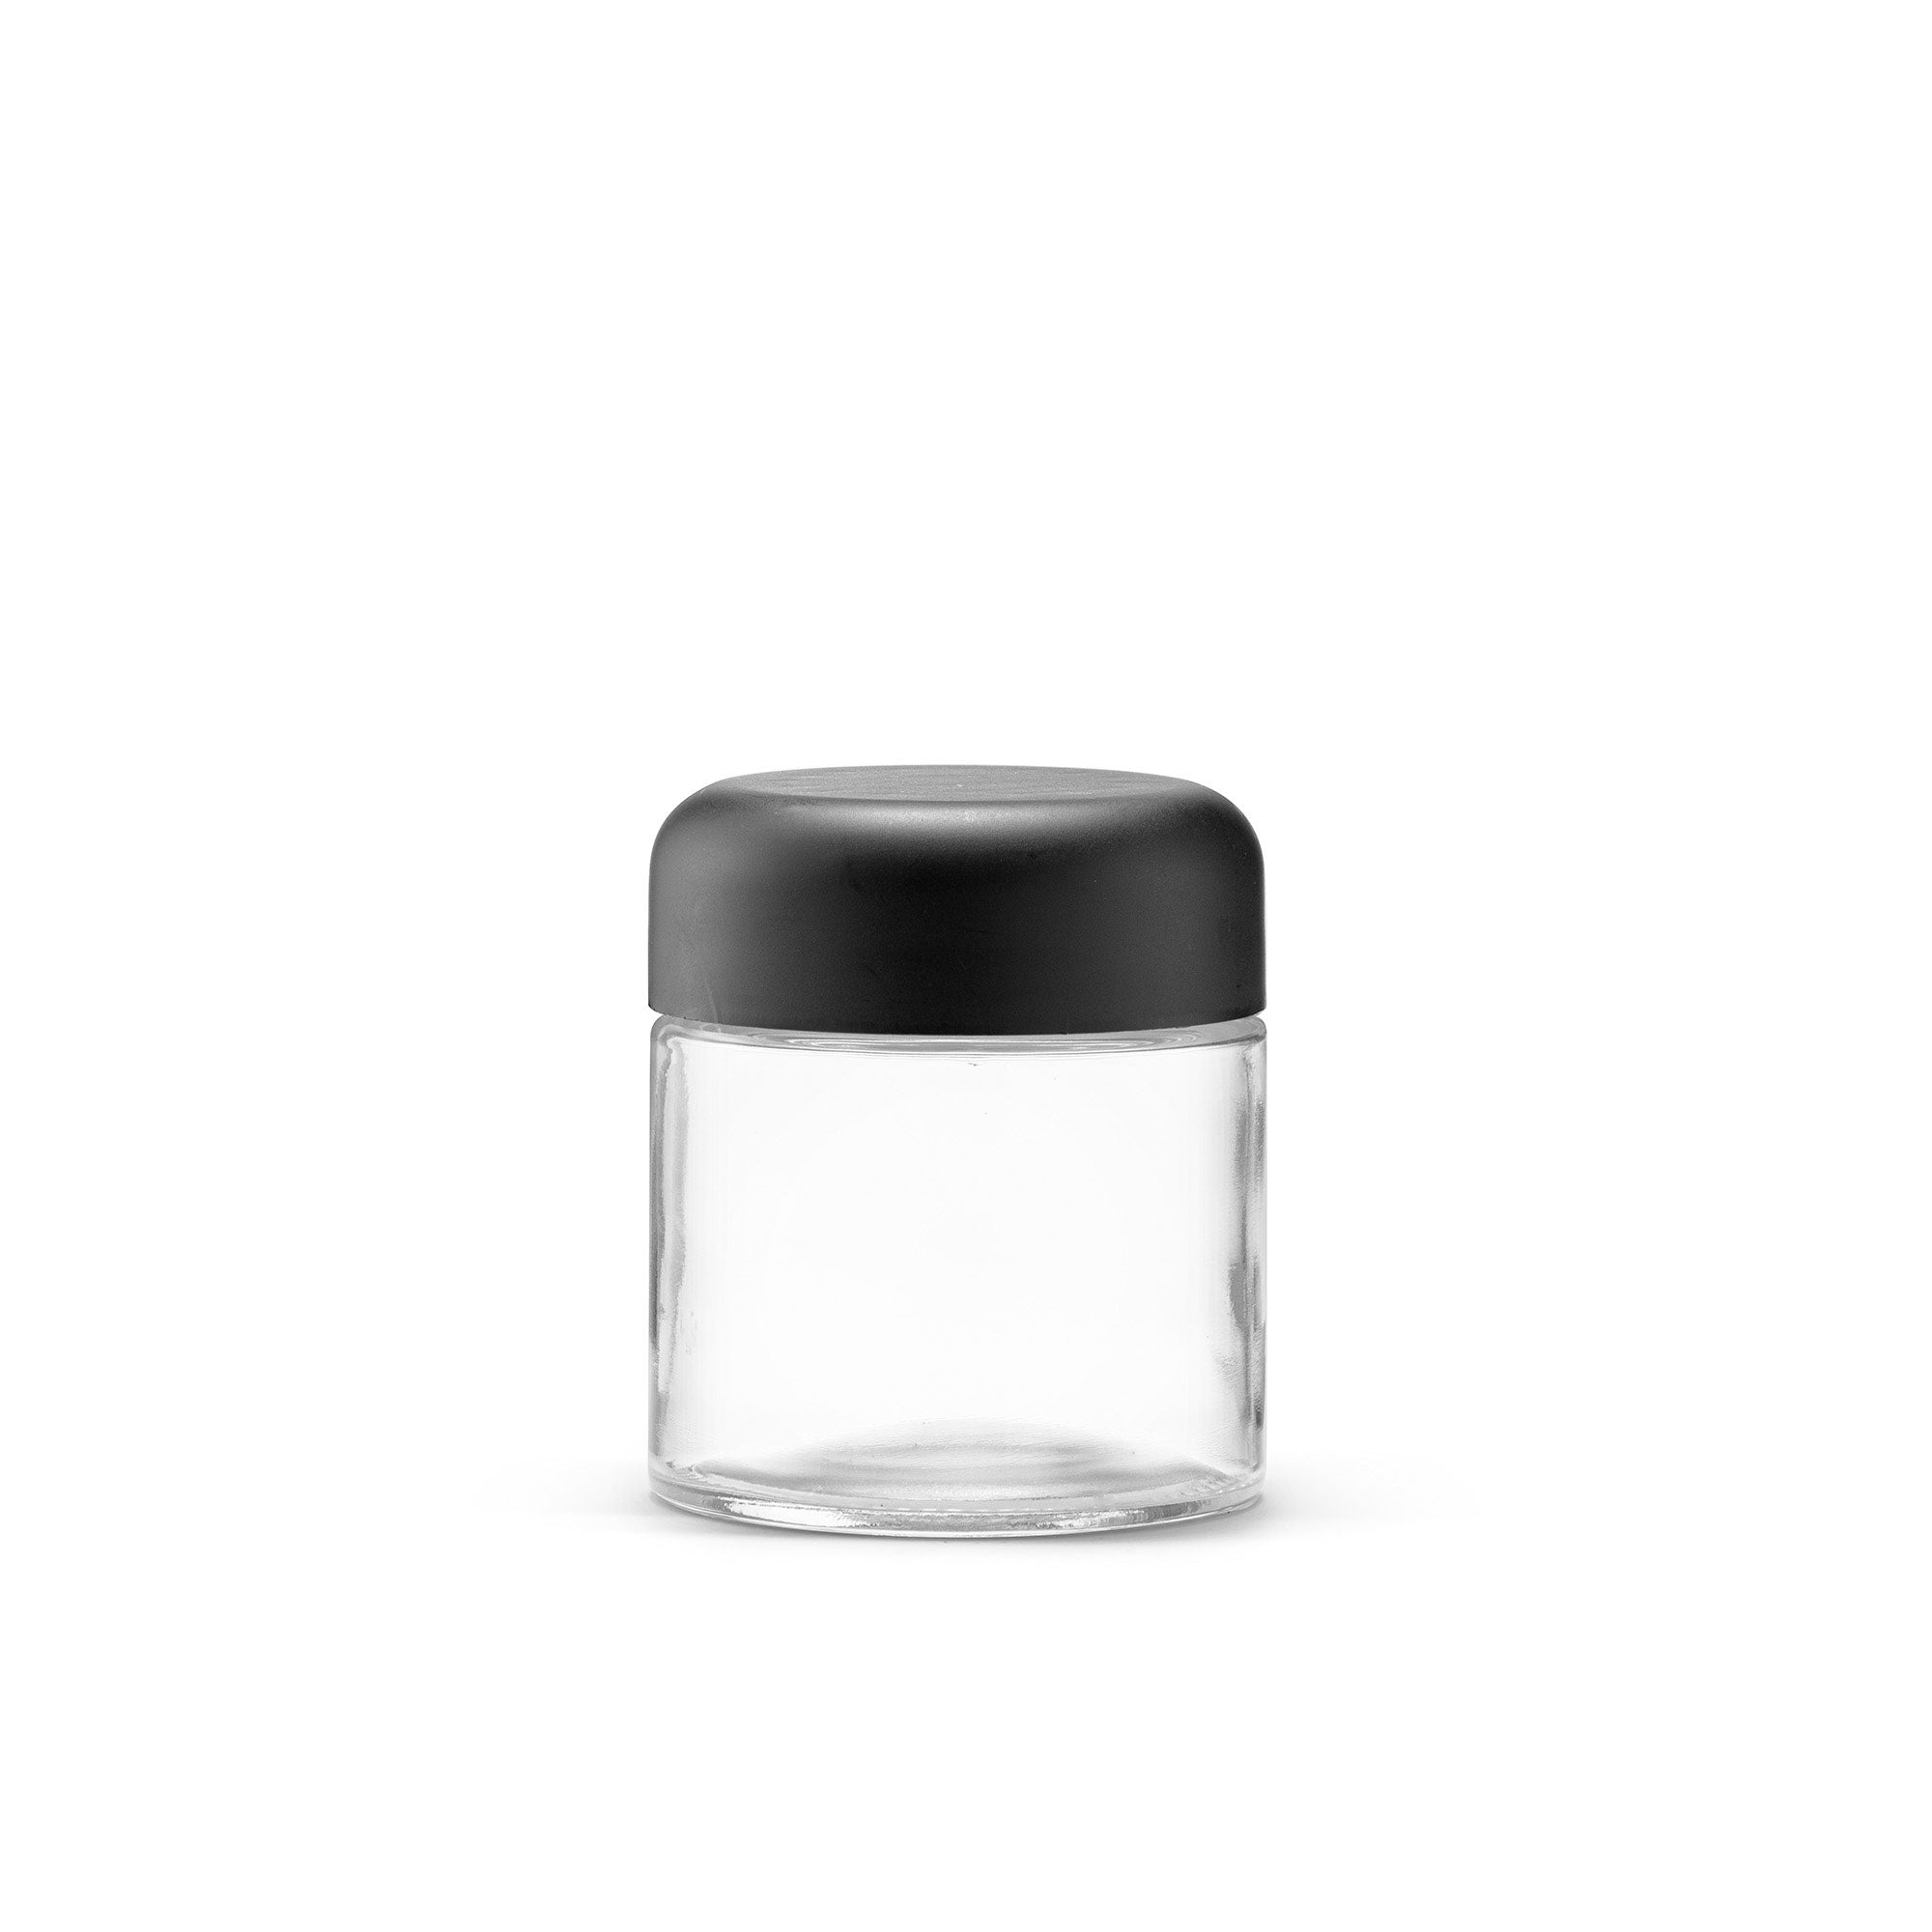 3.5g Clear Plastic Jars, Child Resistant 8th Packaging